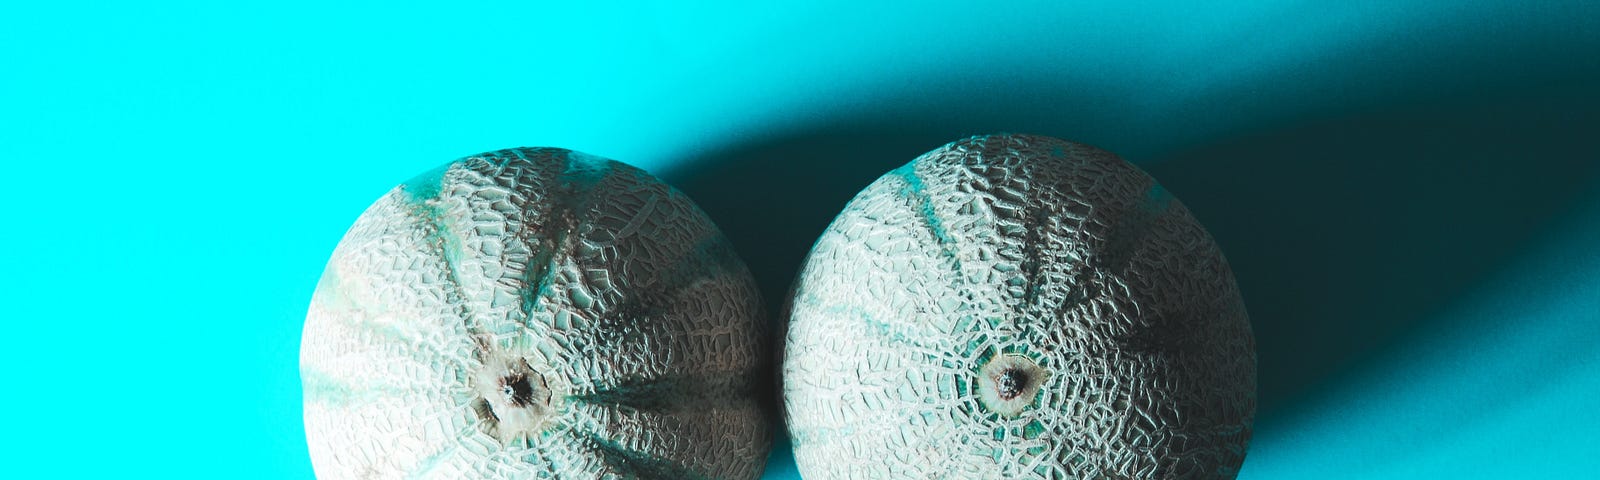 Two side-by-side cantaloupes